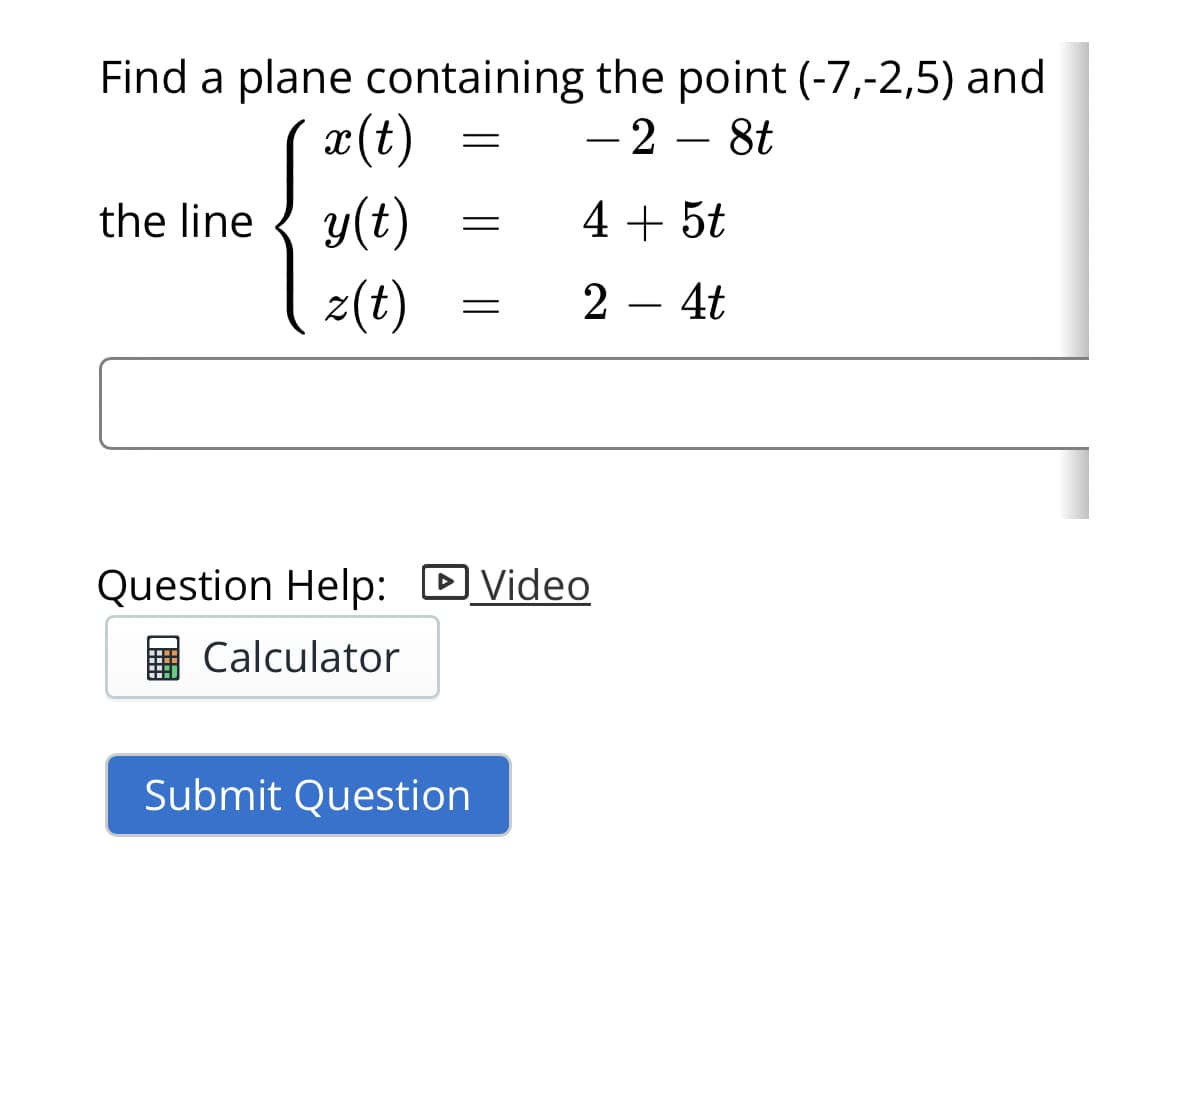 Find a plane containing
x (t)
the line y(t)
z(t)
the point (-7,-2,5) and
- 2 - 8t
4 + 5t
24t
Question Help: Video
D
Calculator
Submit Question